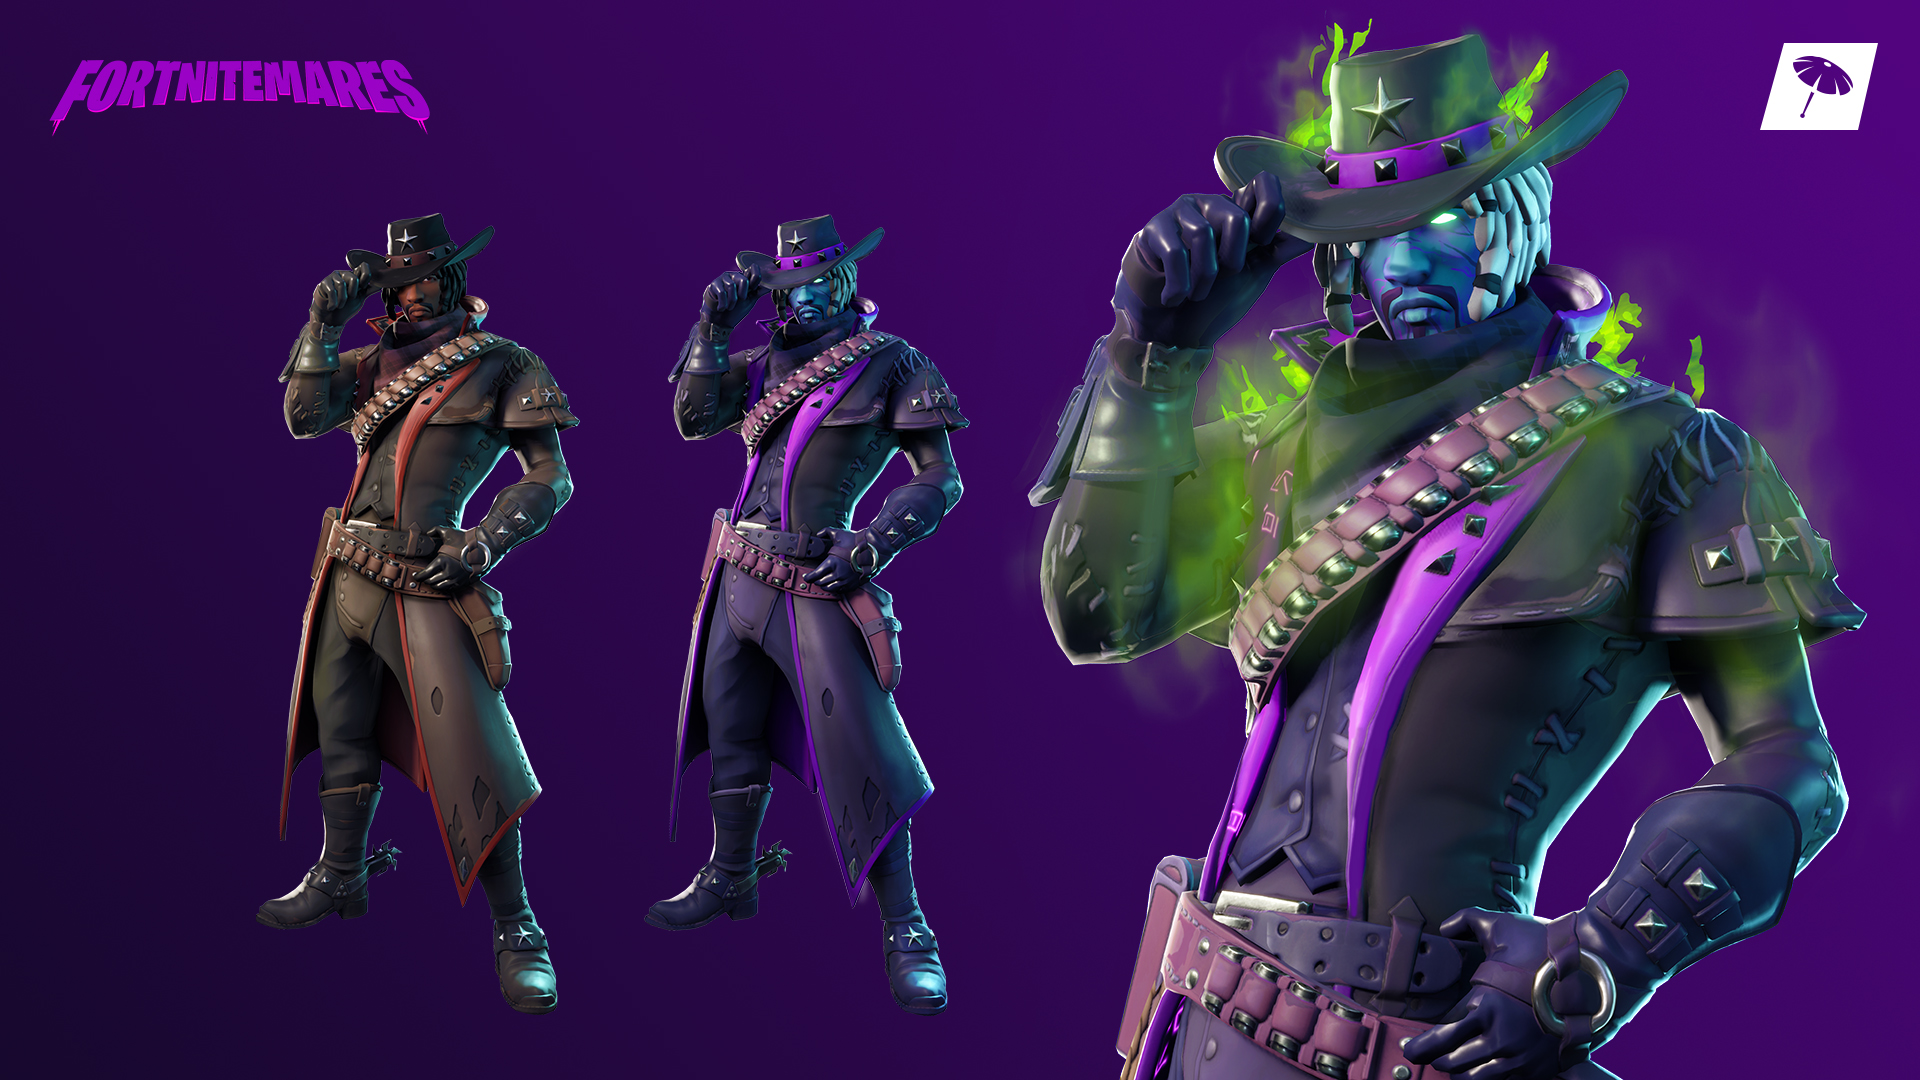 Every upcoming Fortnitemares 2022 skin ranked (best to worst)